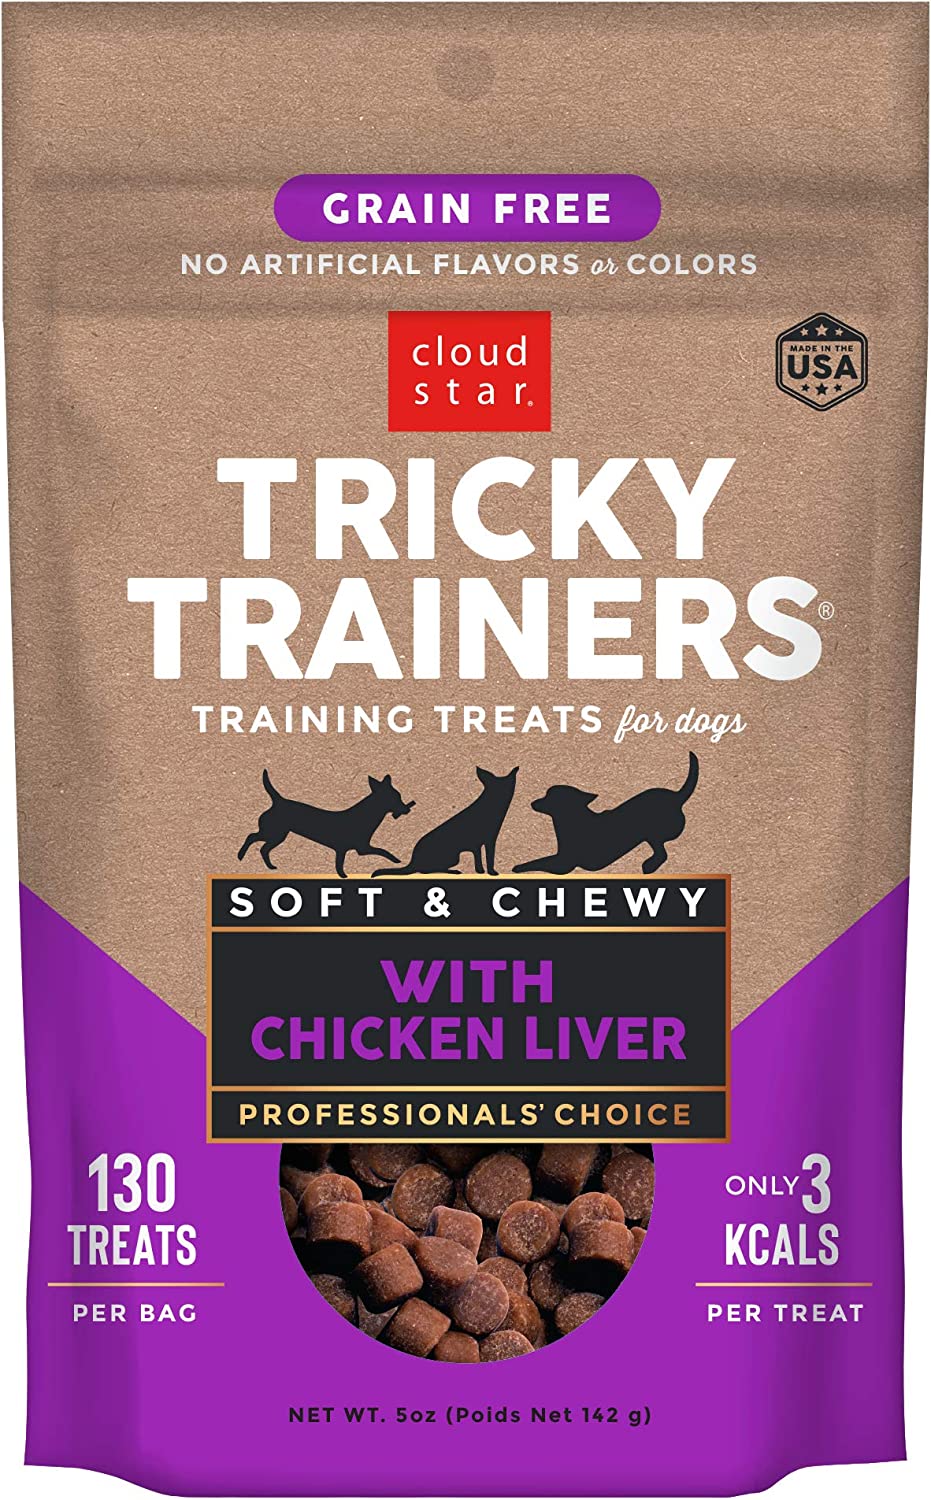 Cloud Star Tricky Trainers Chewy Liver & Grain Free, Low Calorie Dog Training Treats, Baked in the USA (5 oz)